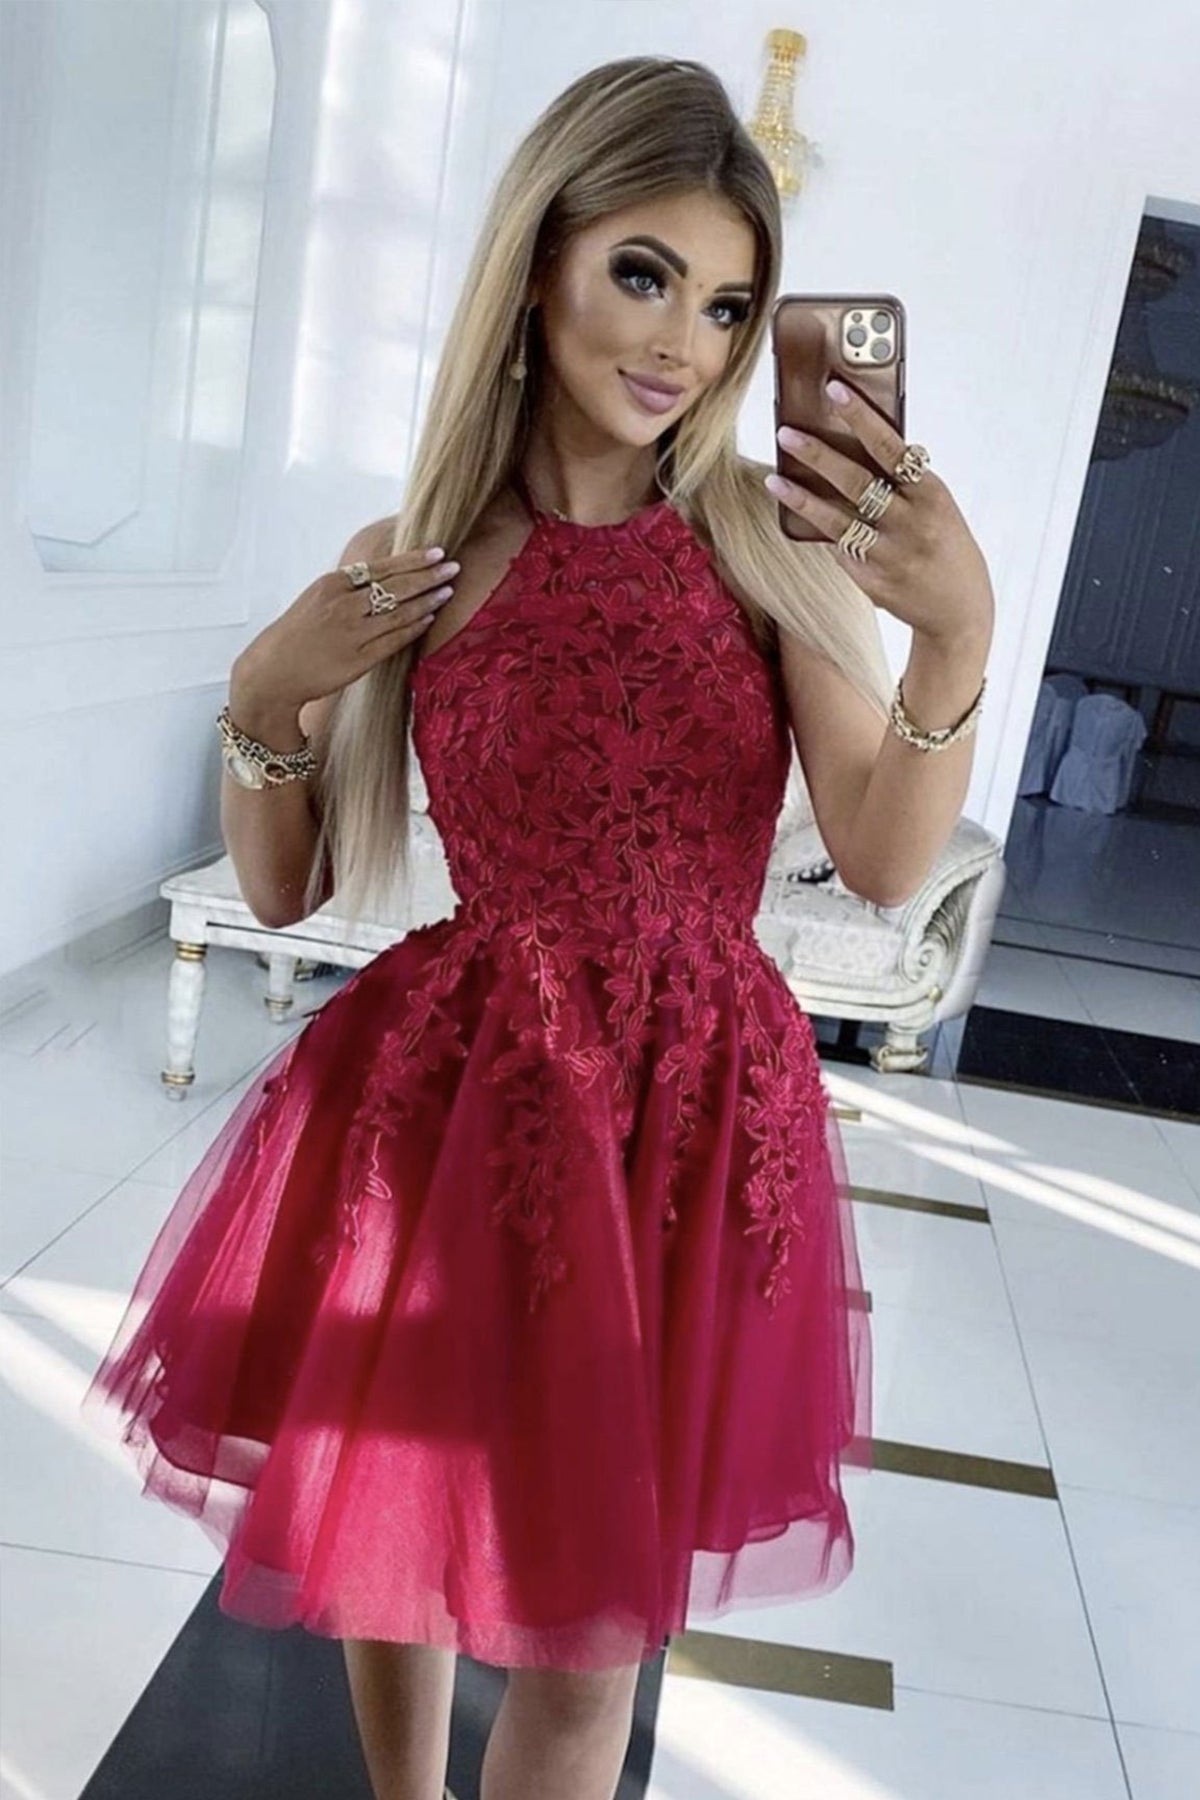 Latest 50 Types of Lace Dresses For Women (2022) - Tips and Beauty | Trendy lace  dresses, Knee length lace dress, Lace dress design